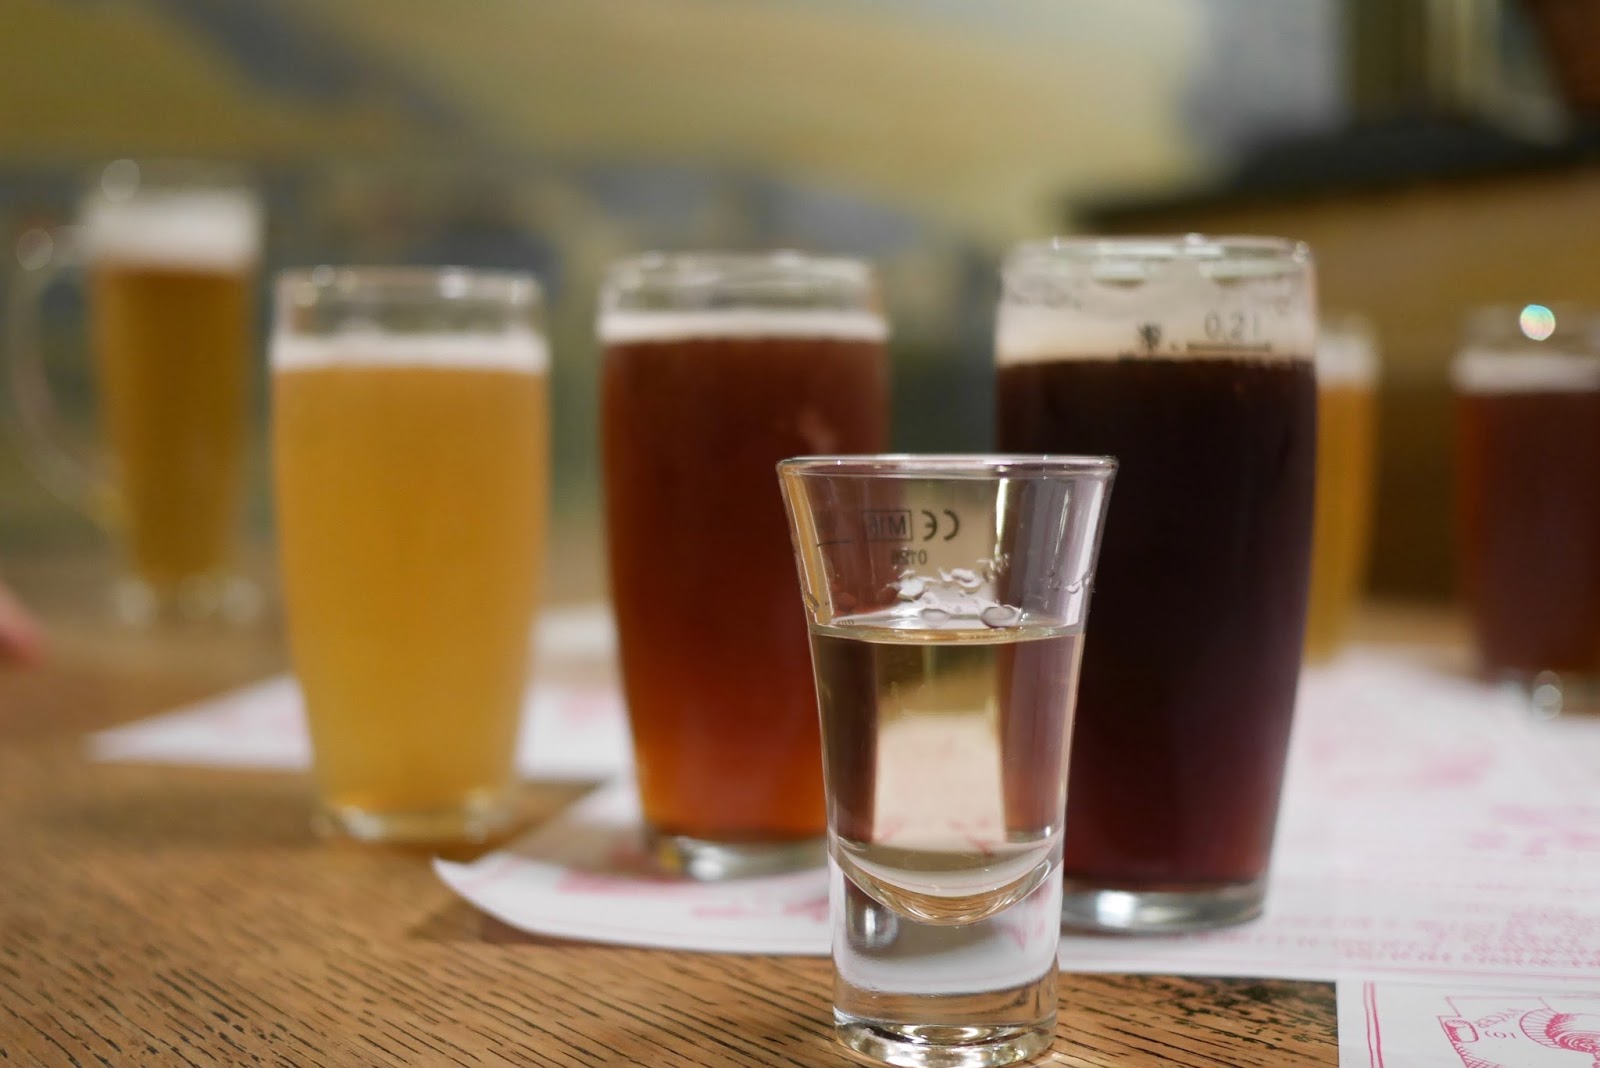 Selection of colourful beers to try during the Beer Prague tour, CalMcTravel.com